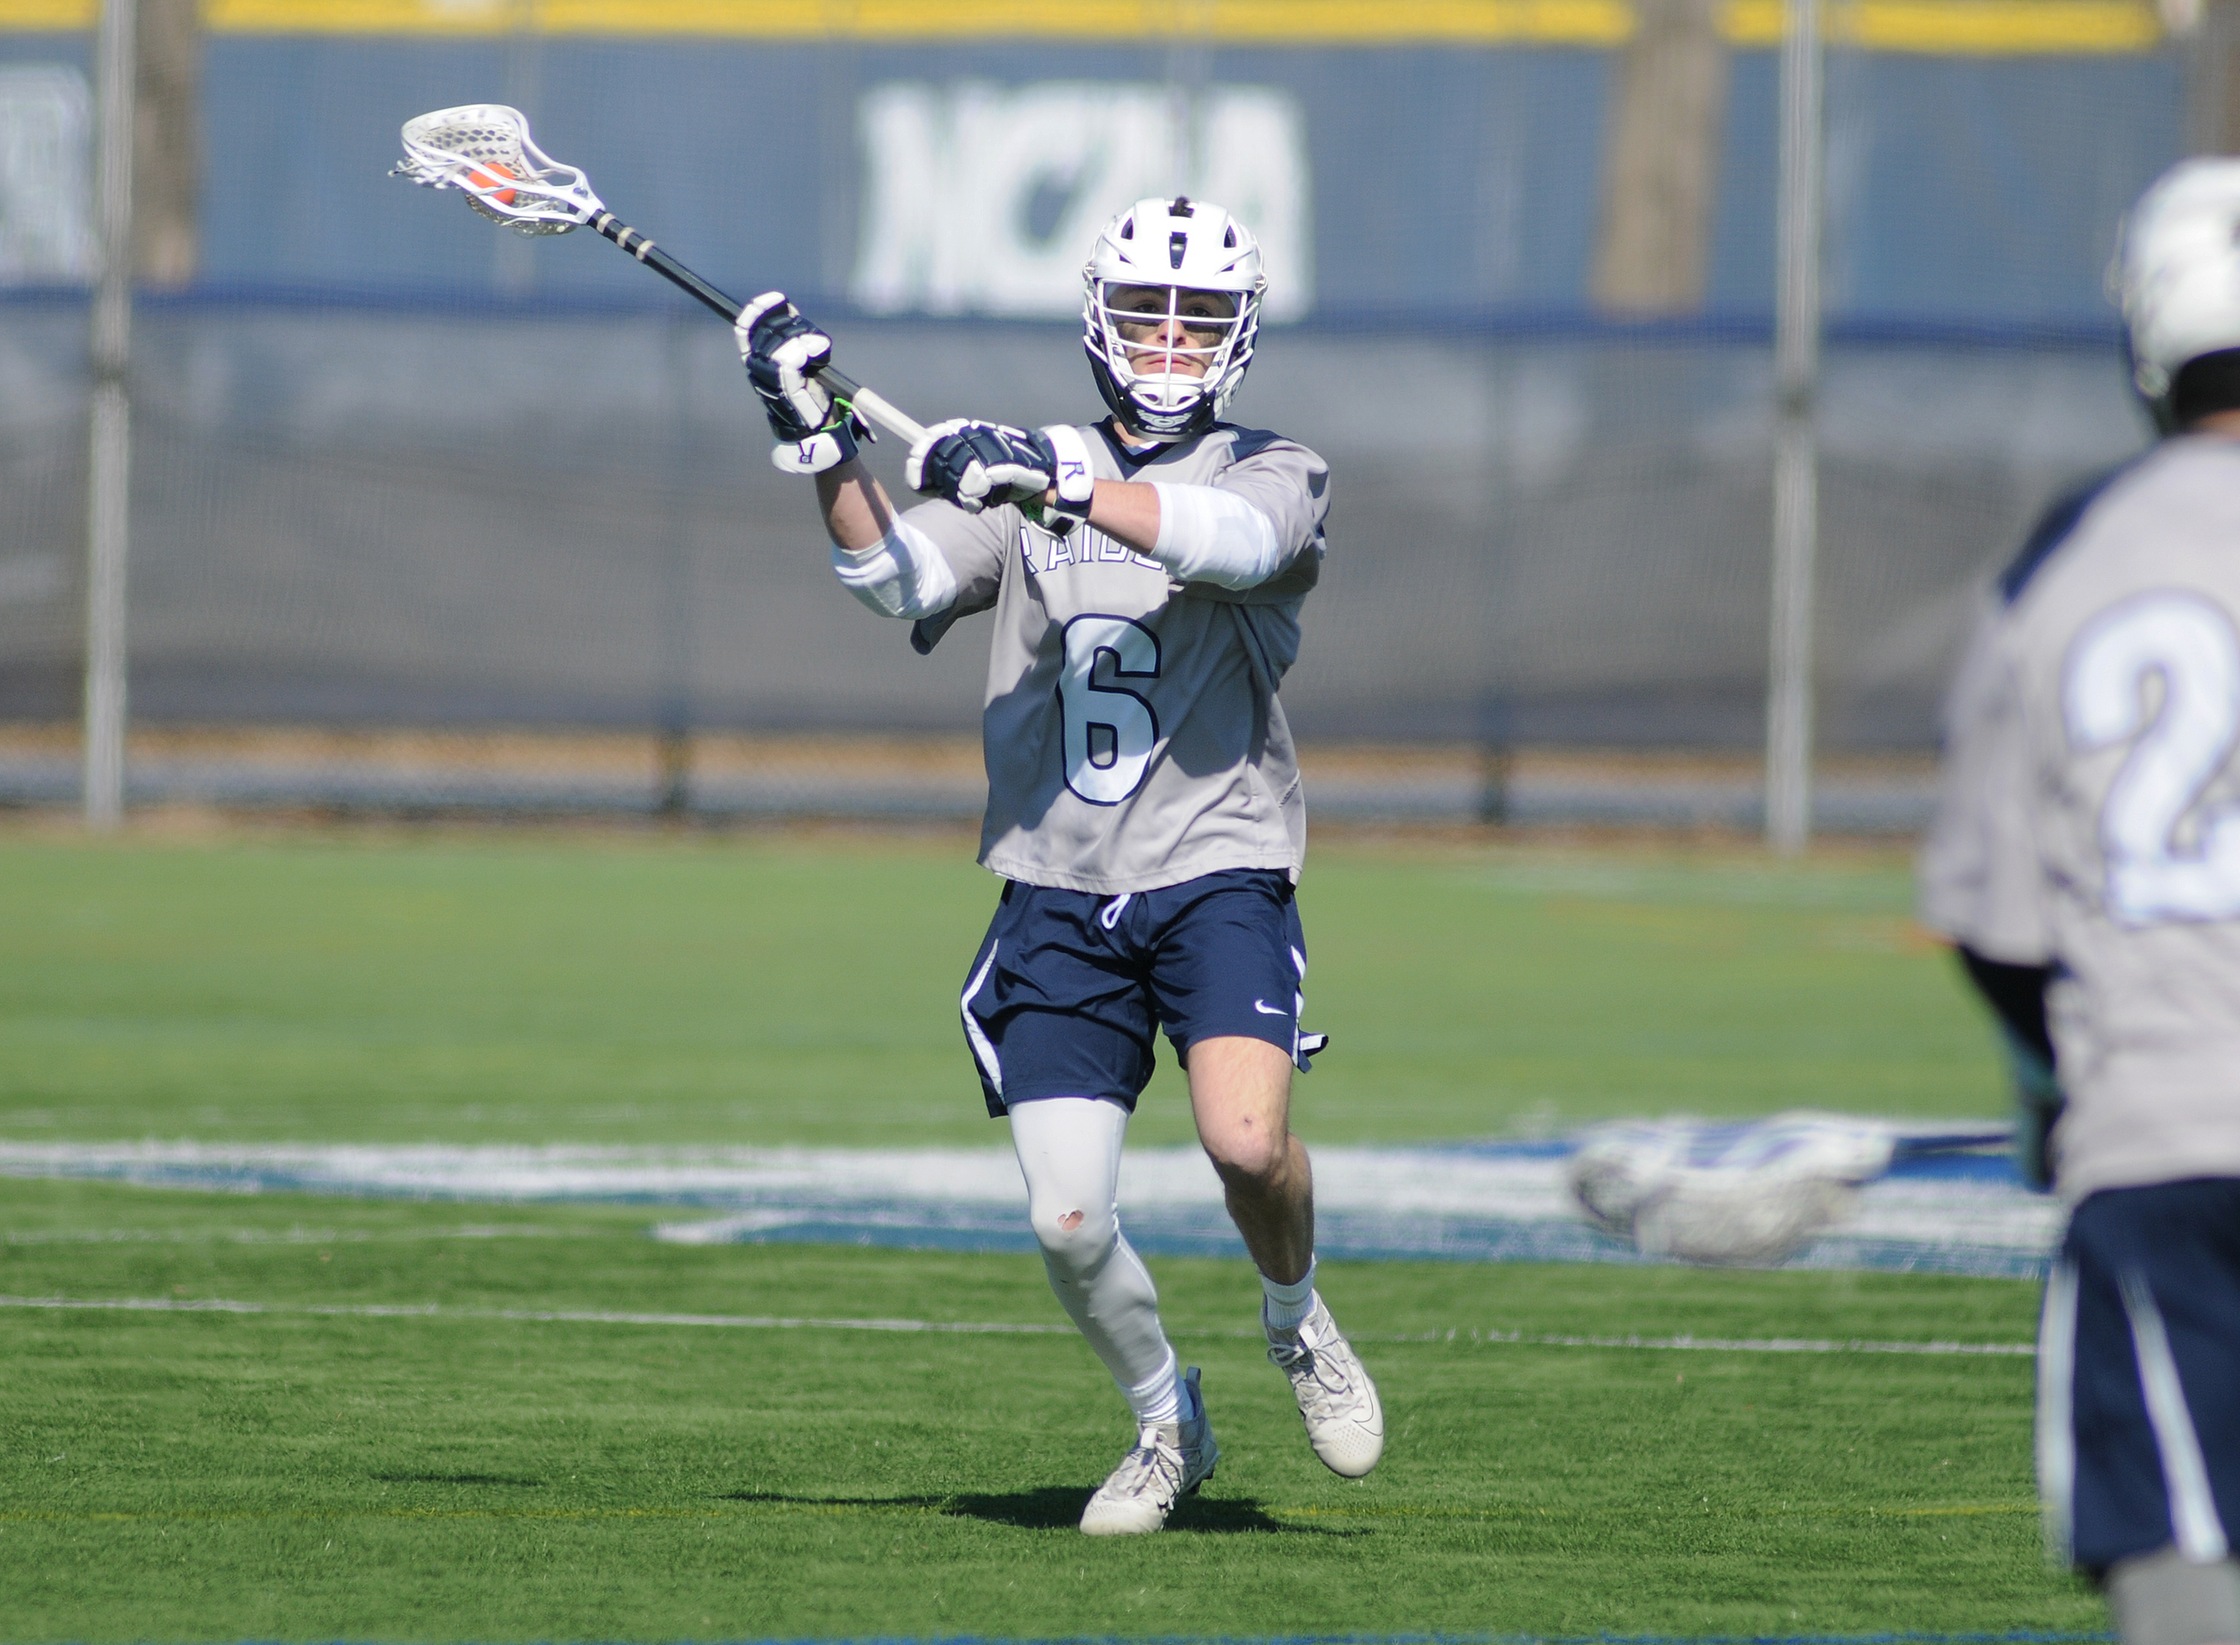 Men's Lacrosse: Raiders downed by the Cadets, 19-8